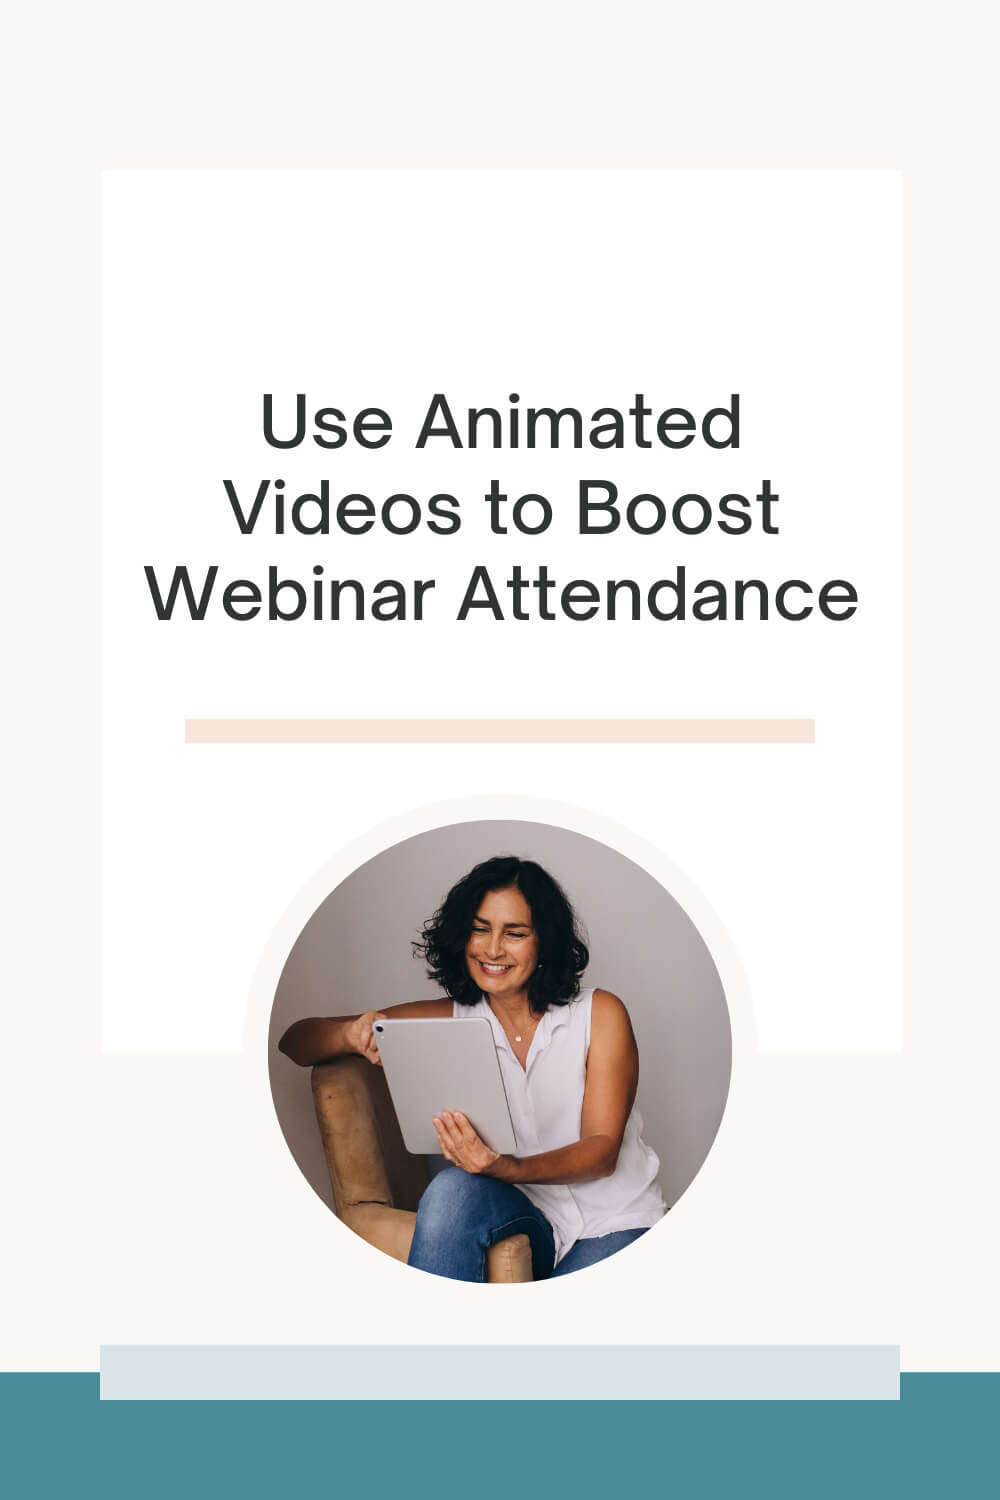 Boost Webinar Attendance with Animated Videos: A Winning Strategy